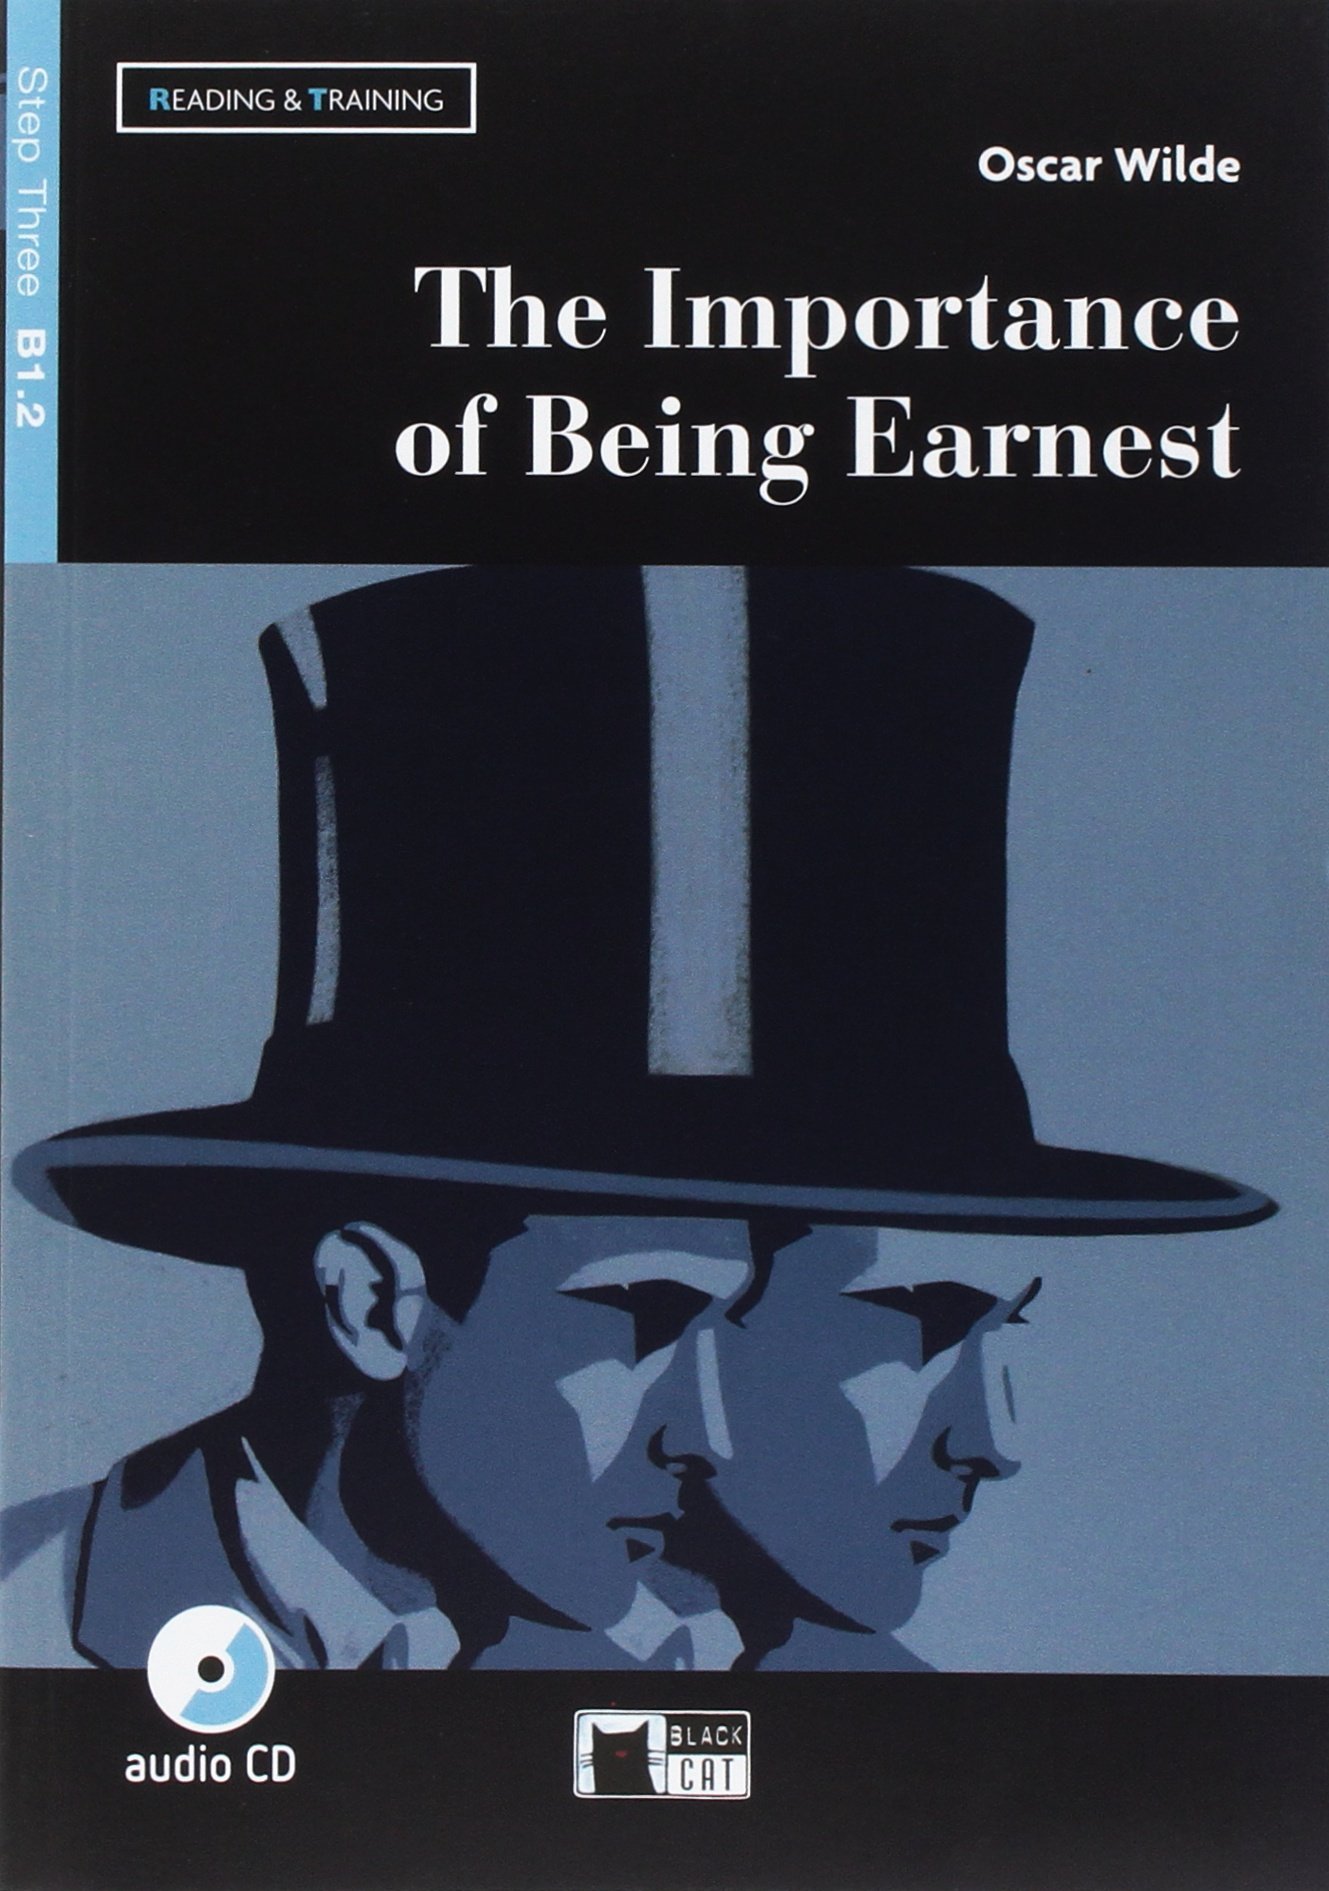 Reading &amp; Training: Oscar Wilde - The Importance of Being Earnest + CD